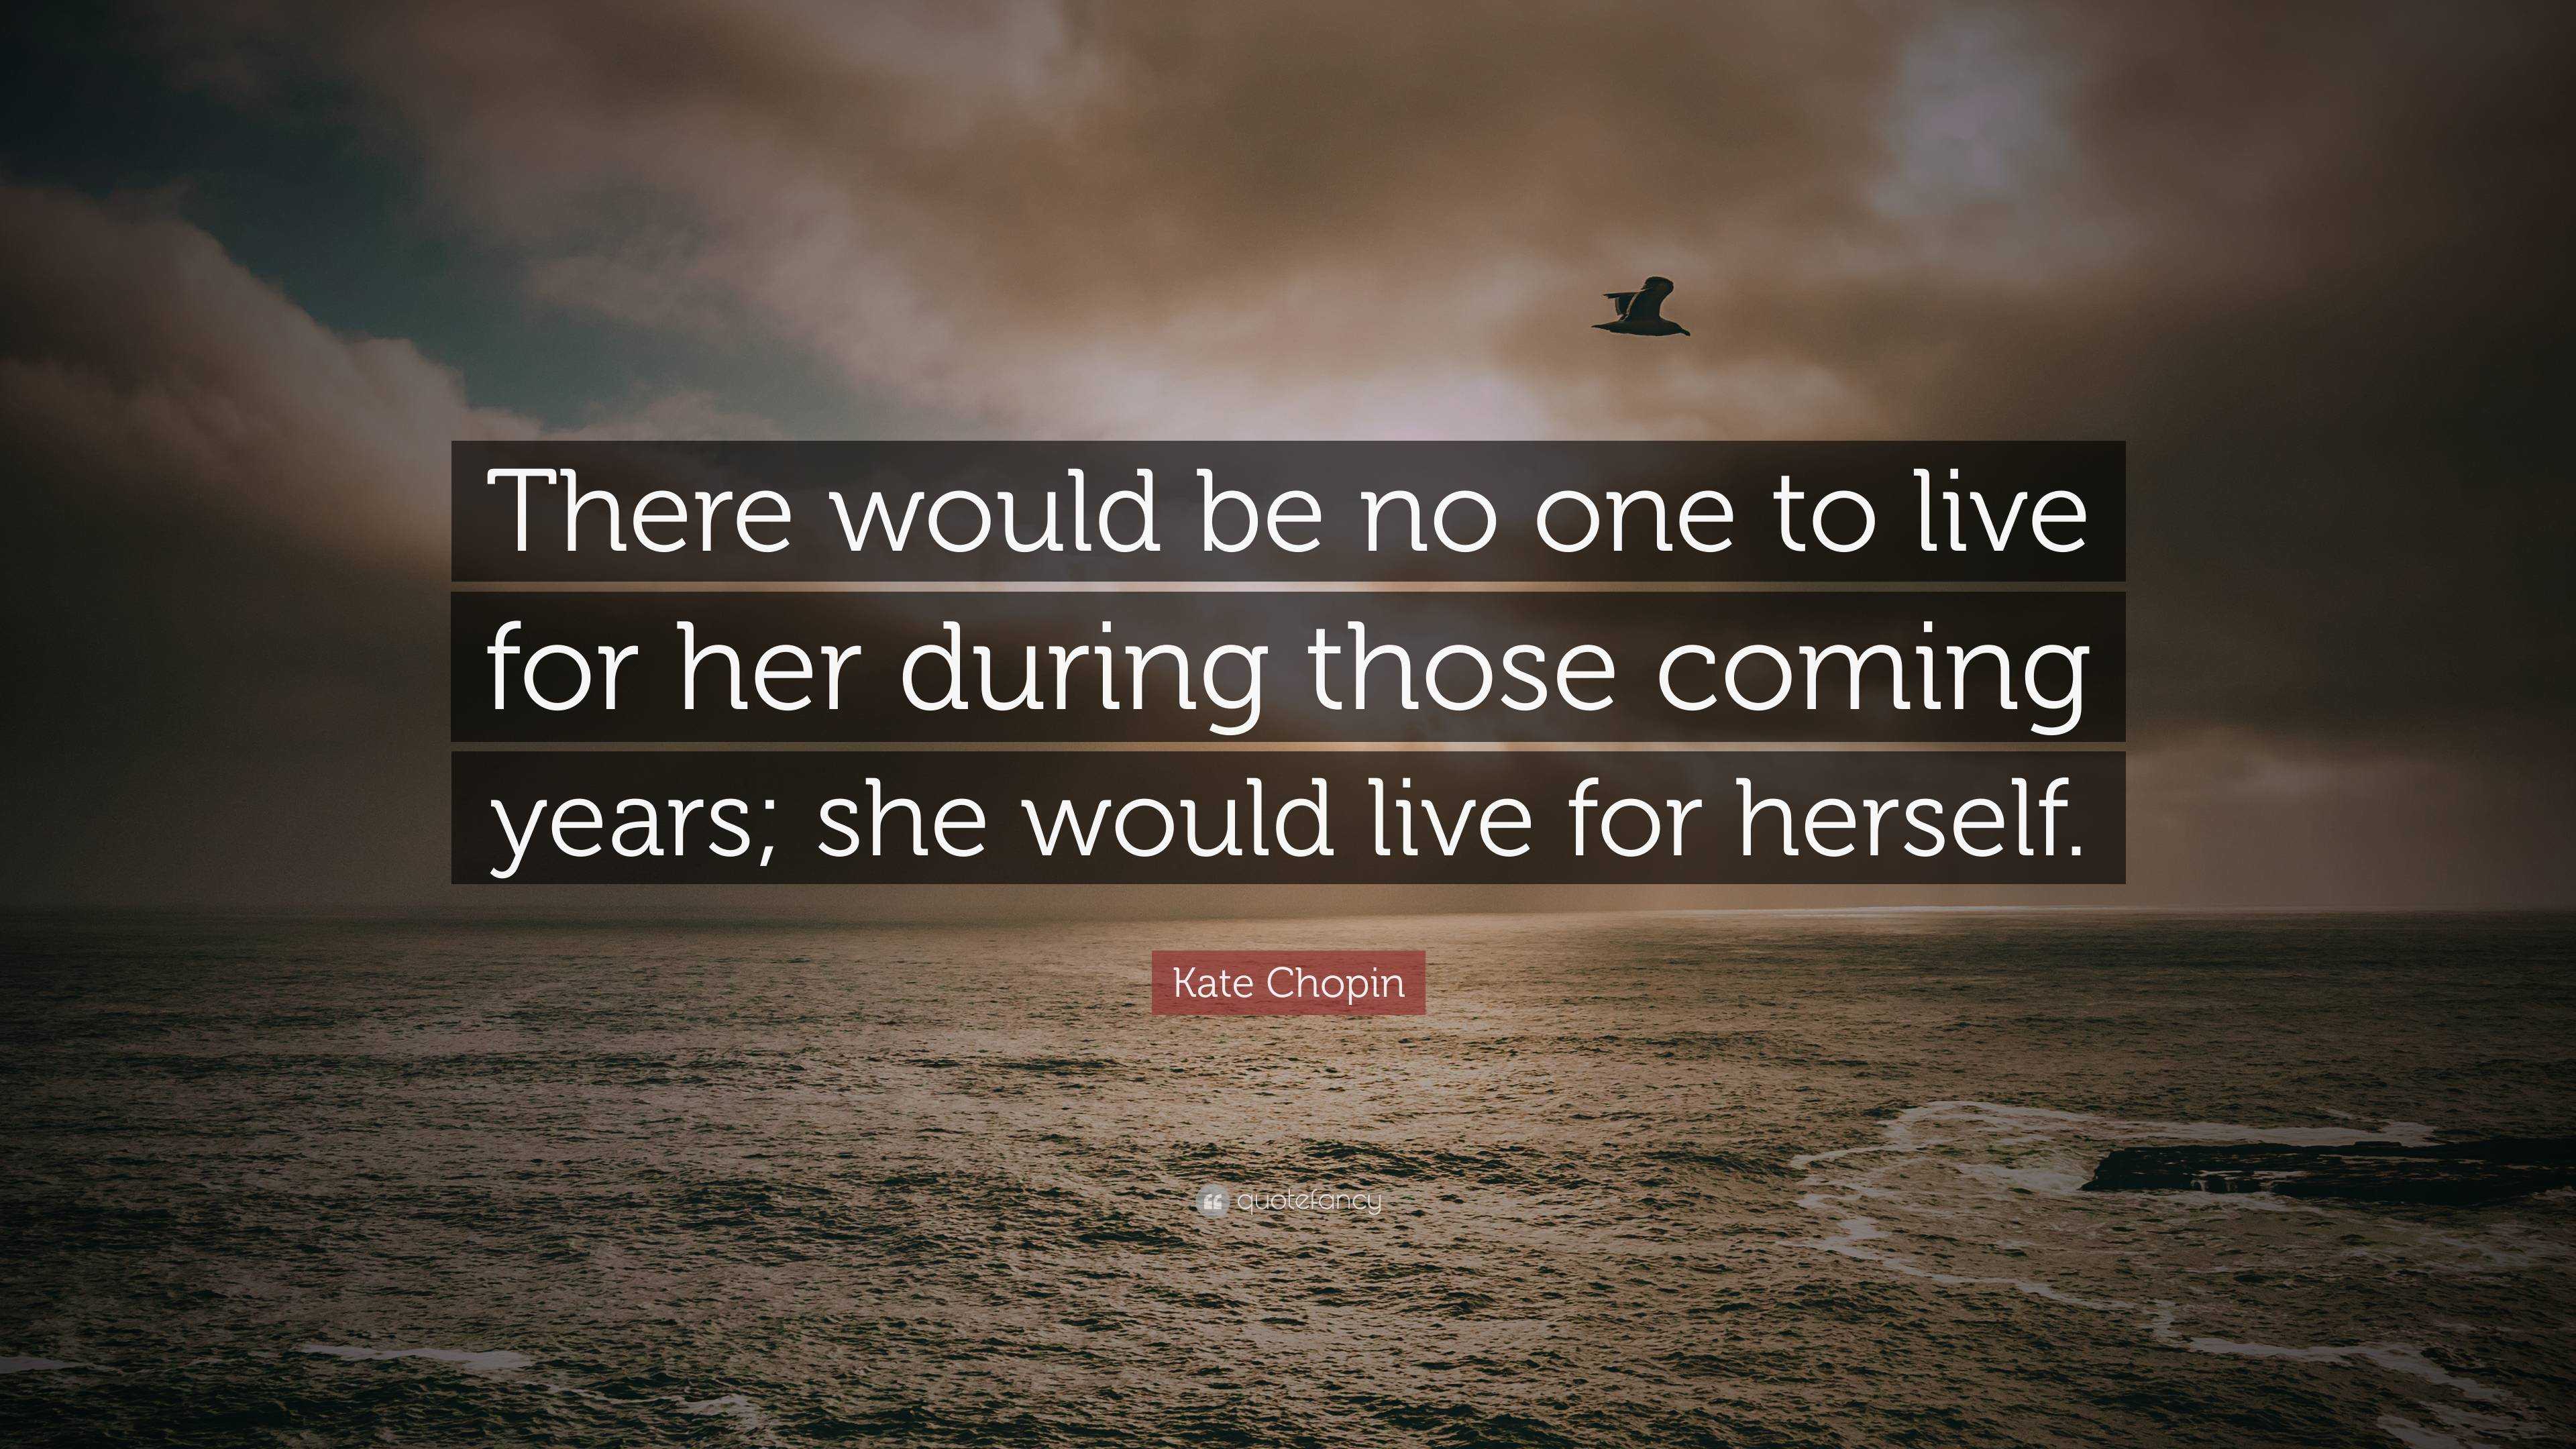 Kate Chopin Quote: “There would be no one to live for her during those ...